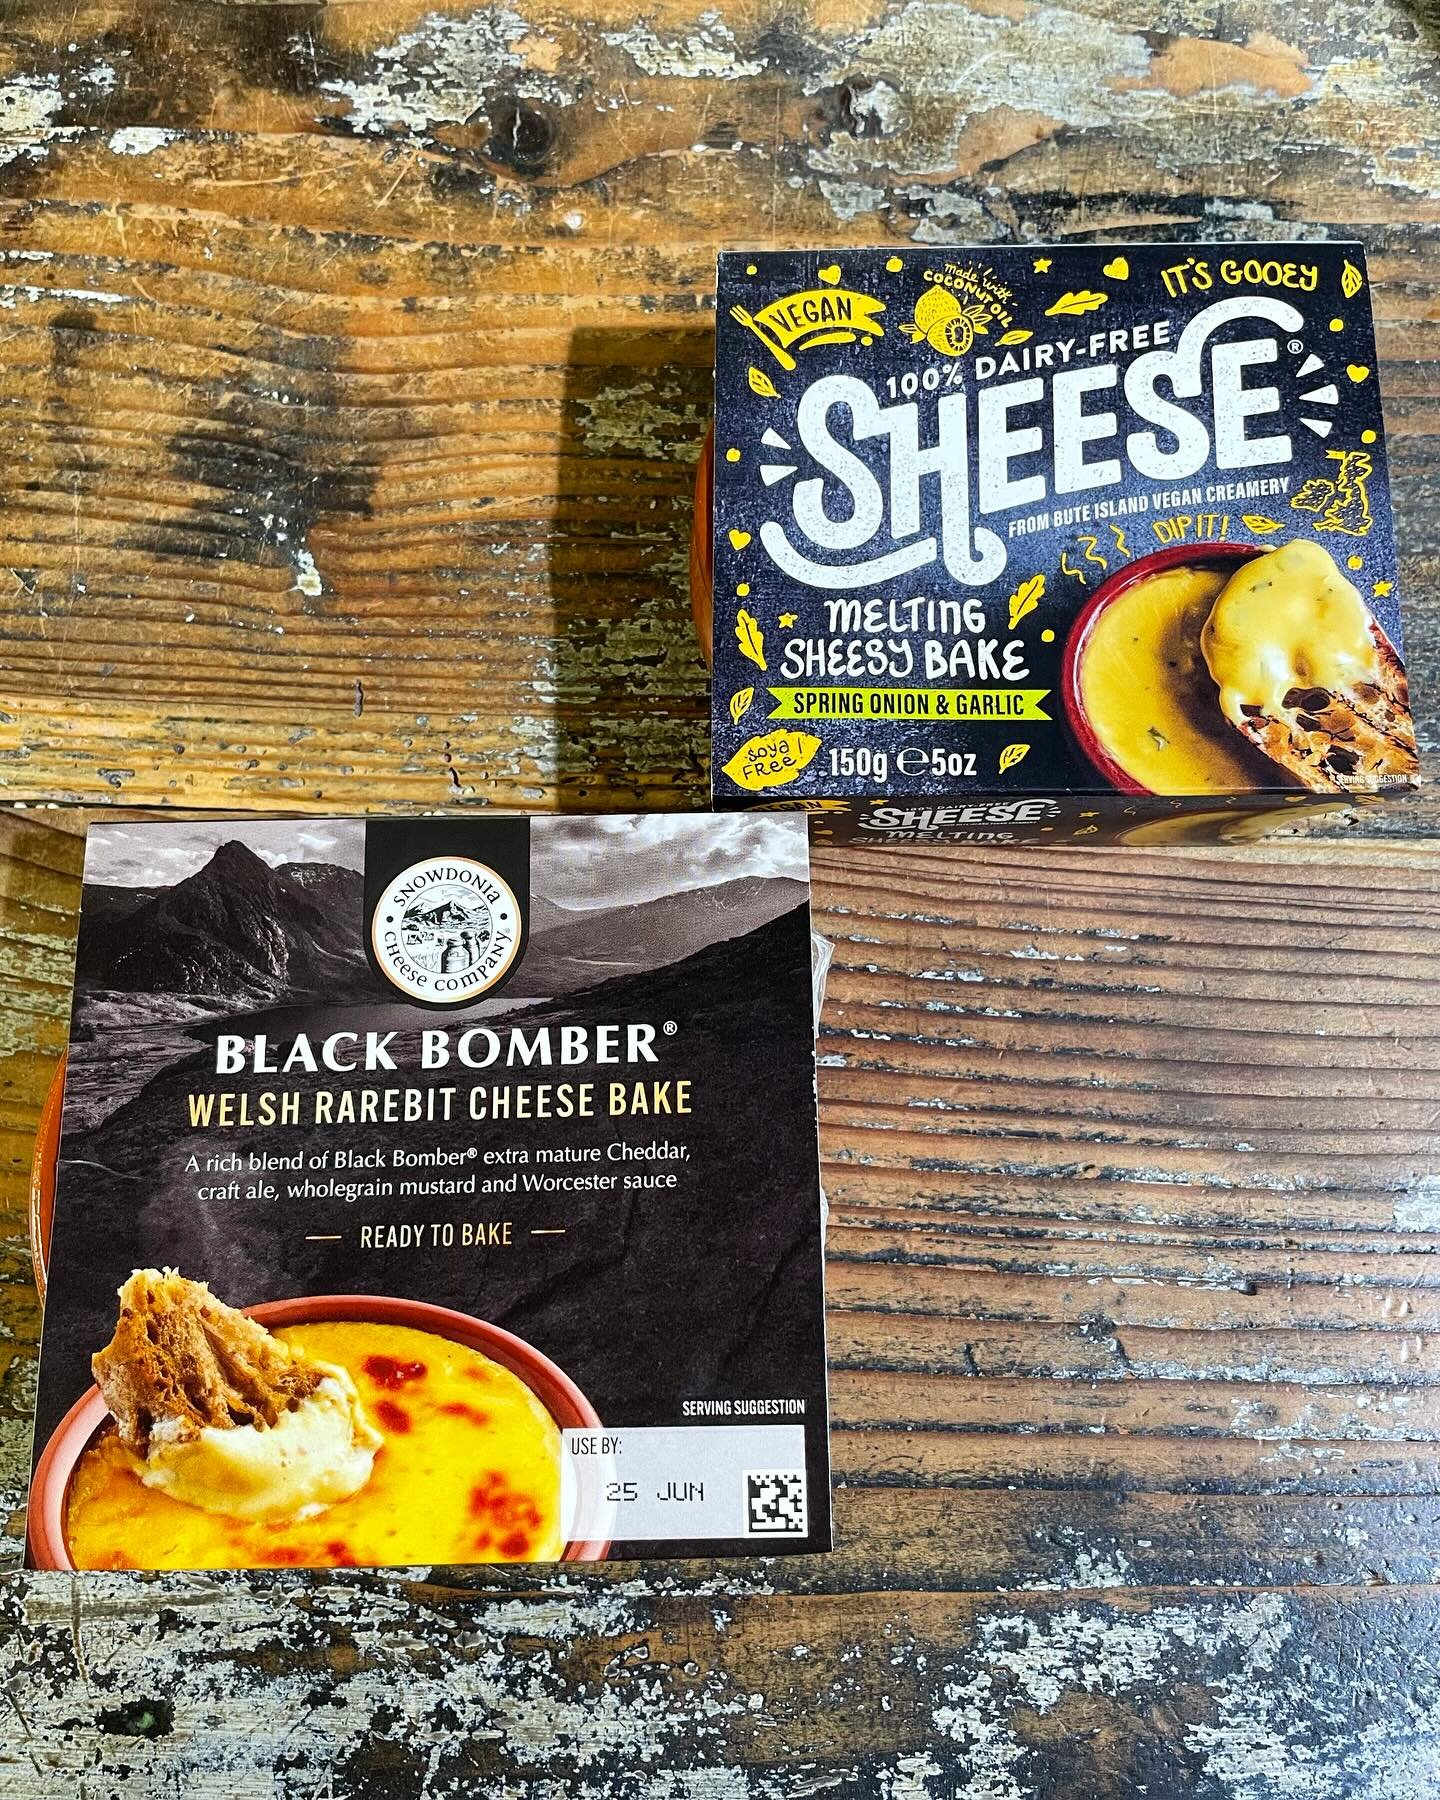 🫕 Cheese night anyone? We have two scrummy cheese bakes to choose from, the Black Bomber Welsh rarebit and Sheese with spring onion &amp; garlic which is also vegan 🌱 
#cheesenight 
.
.
.
.
.
.
.
.
.
.
.
.
.
.
.
.
#cheese #vegan #vegancheese #bakes